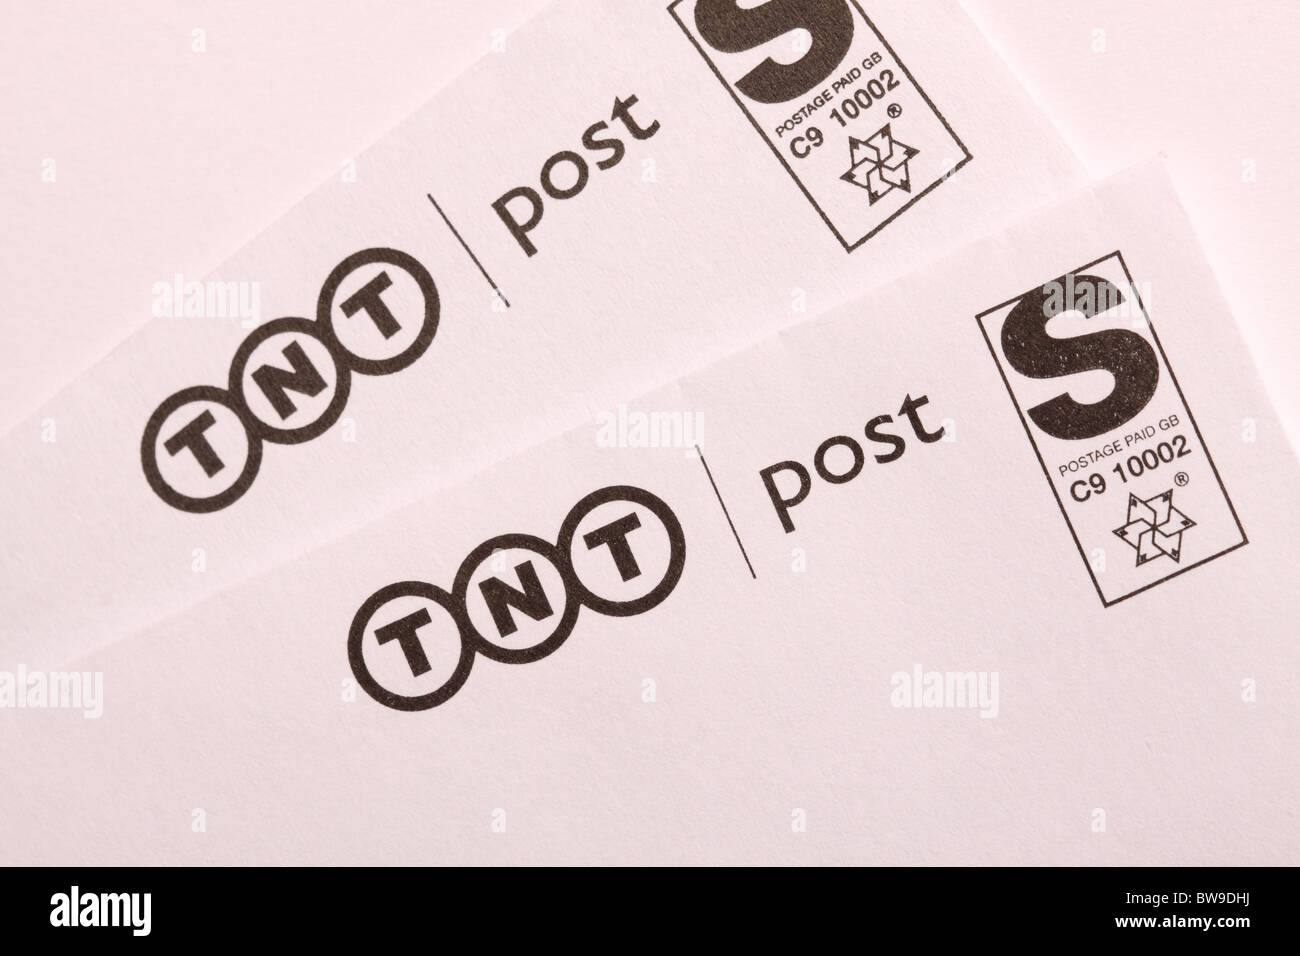 TNT Post letter postal mail delivery service Stock Photo